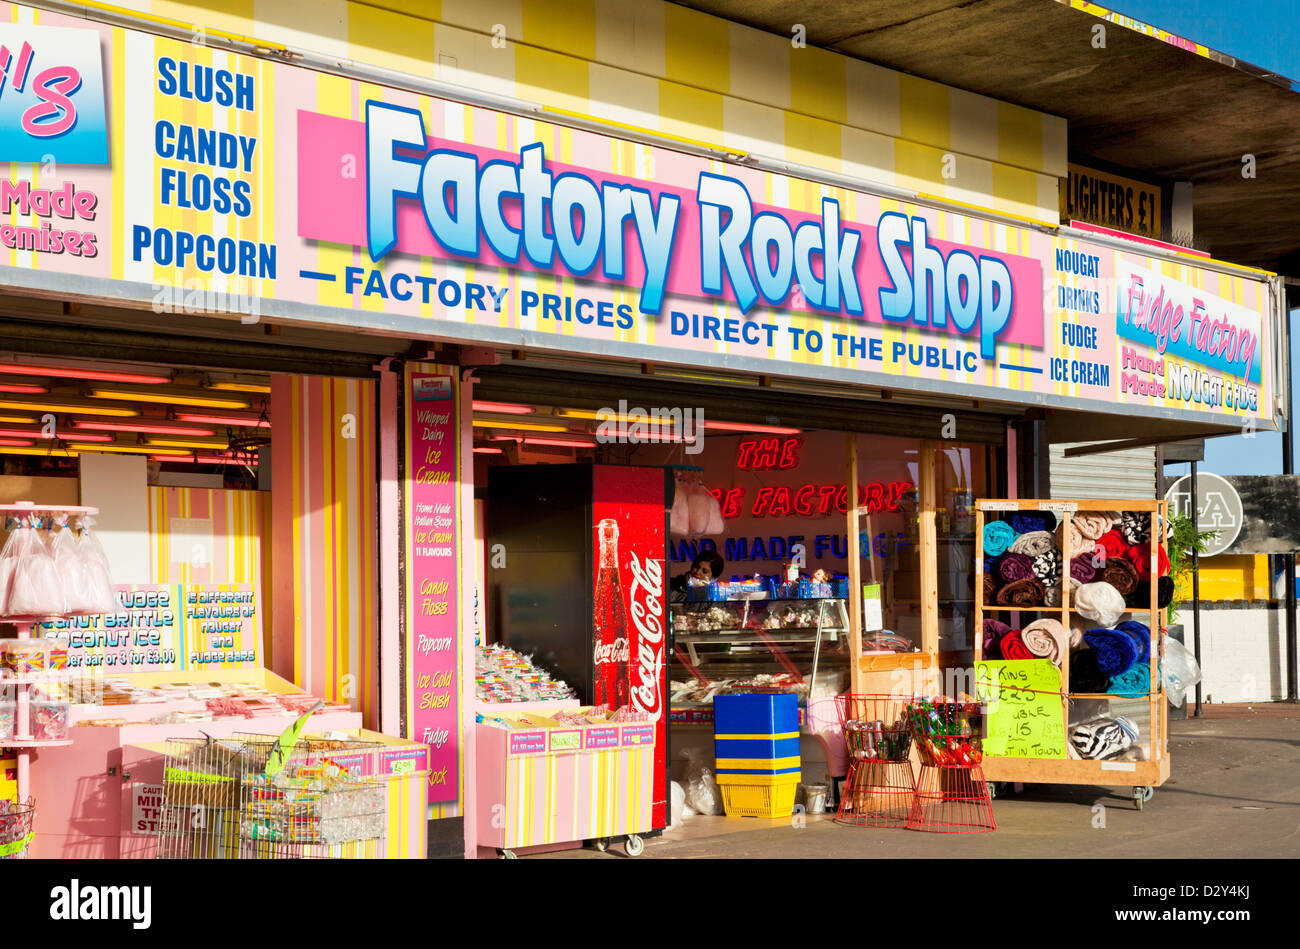 Signs for a factory Rock shop at  Skegness seafront Lincolnshire England UK GB EU Europe Stock Photo